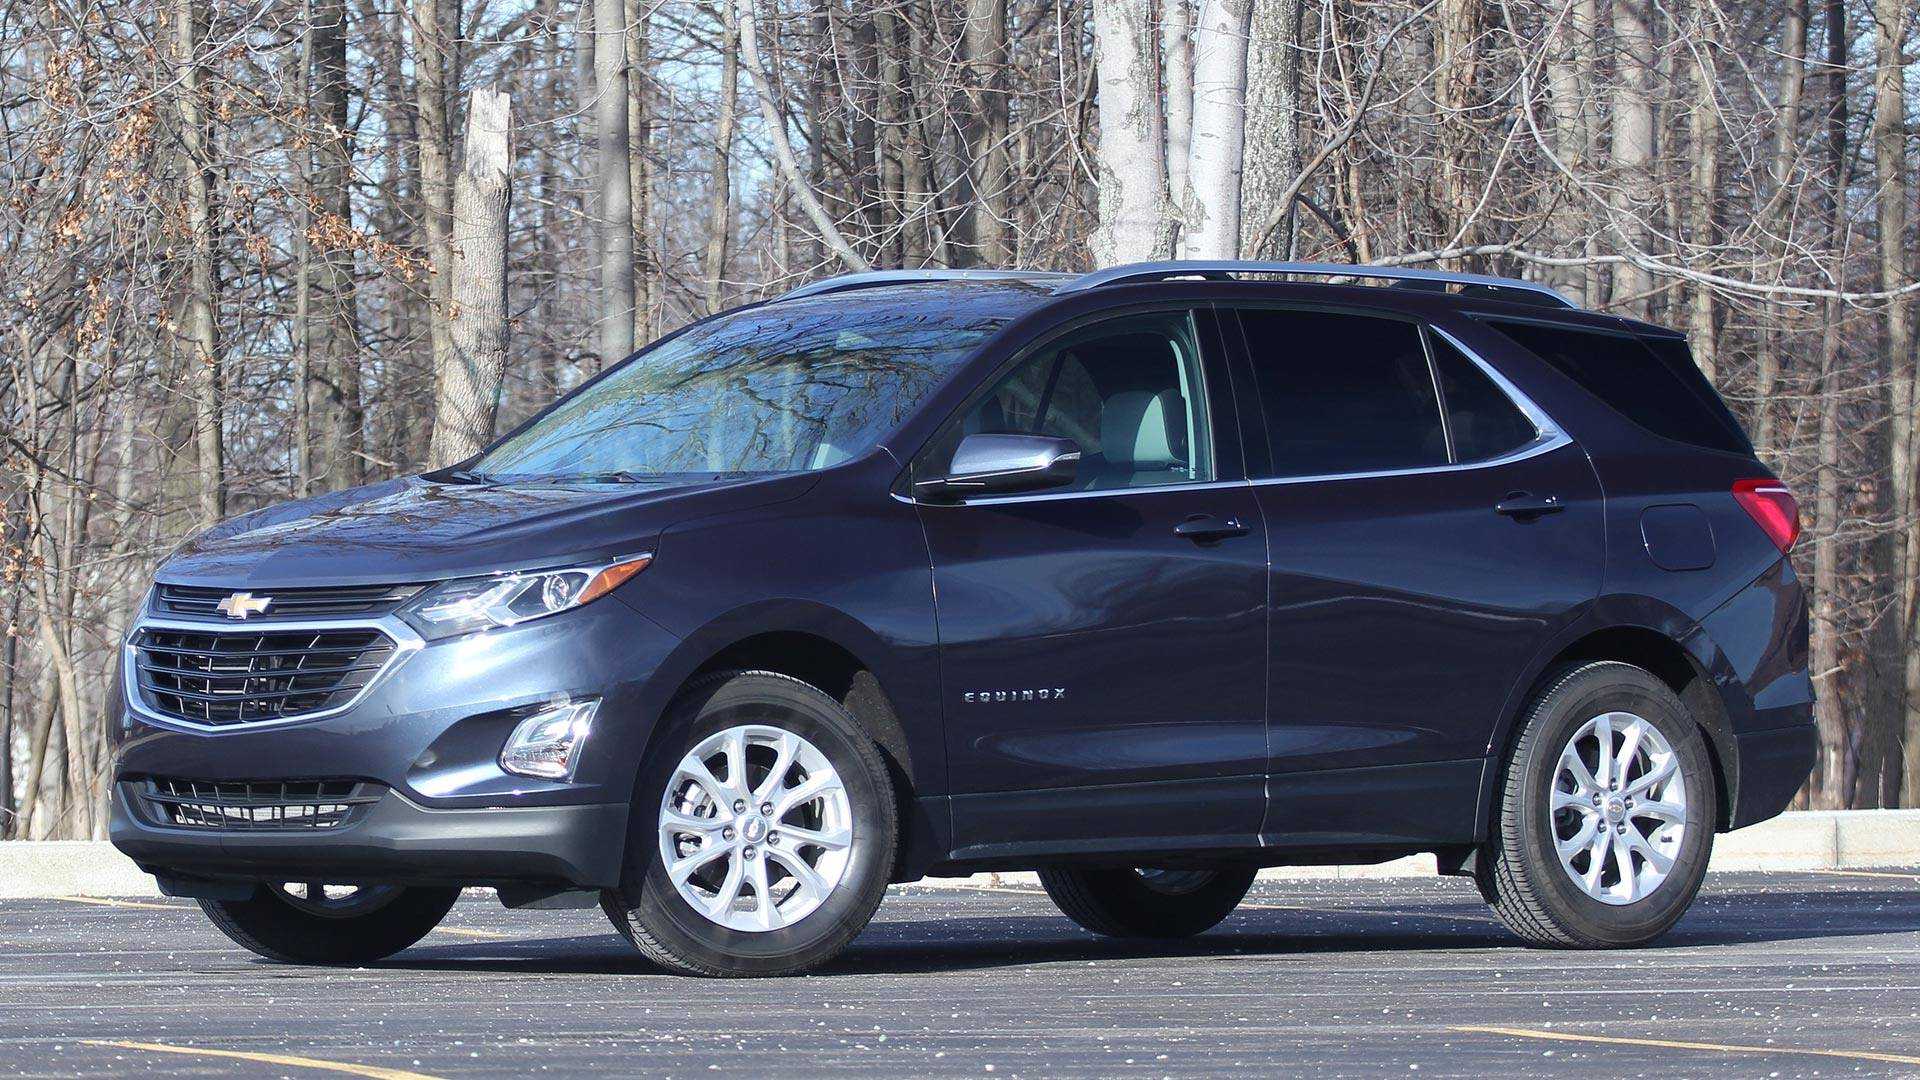 2018 Chevy Equinox Diesel Review: Going The Distance